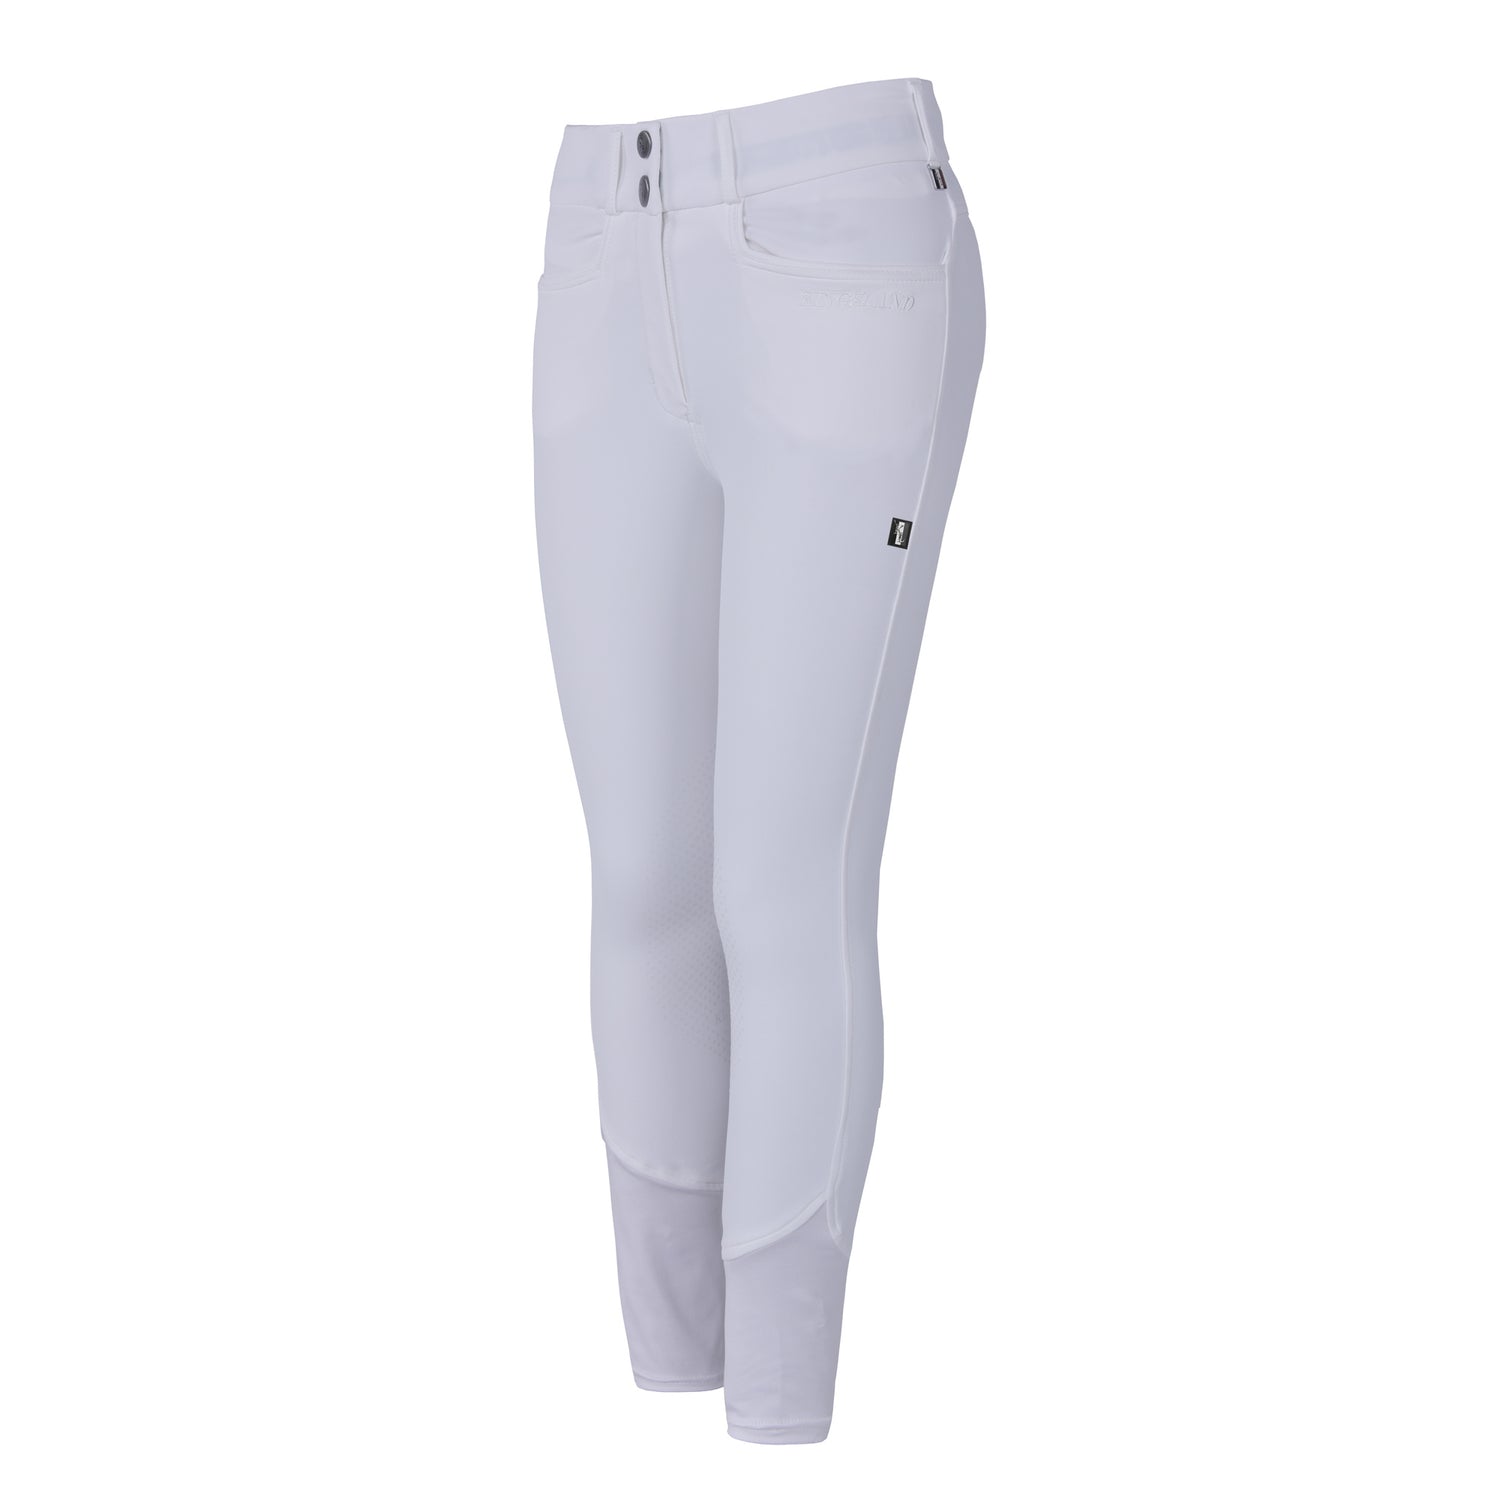 Kingsland White Competition Breeches with knee grip